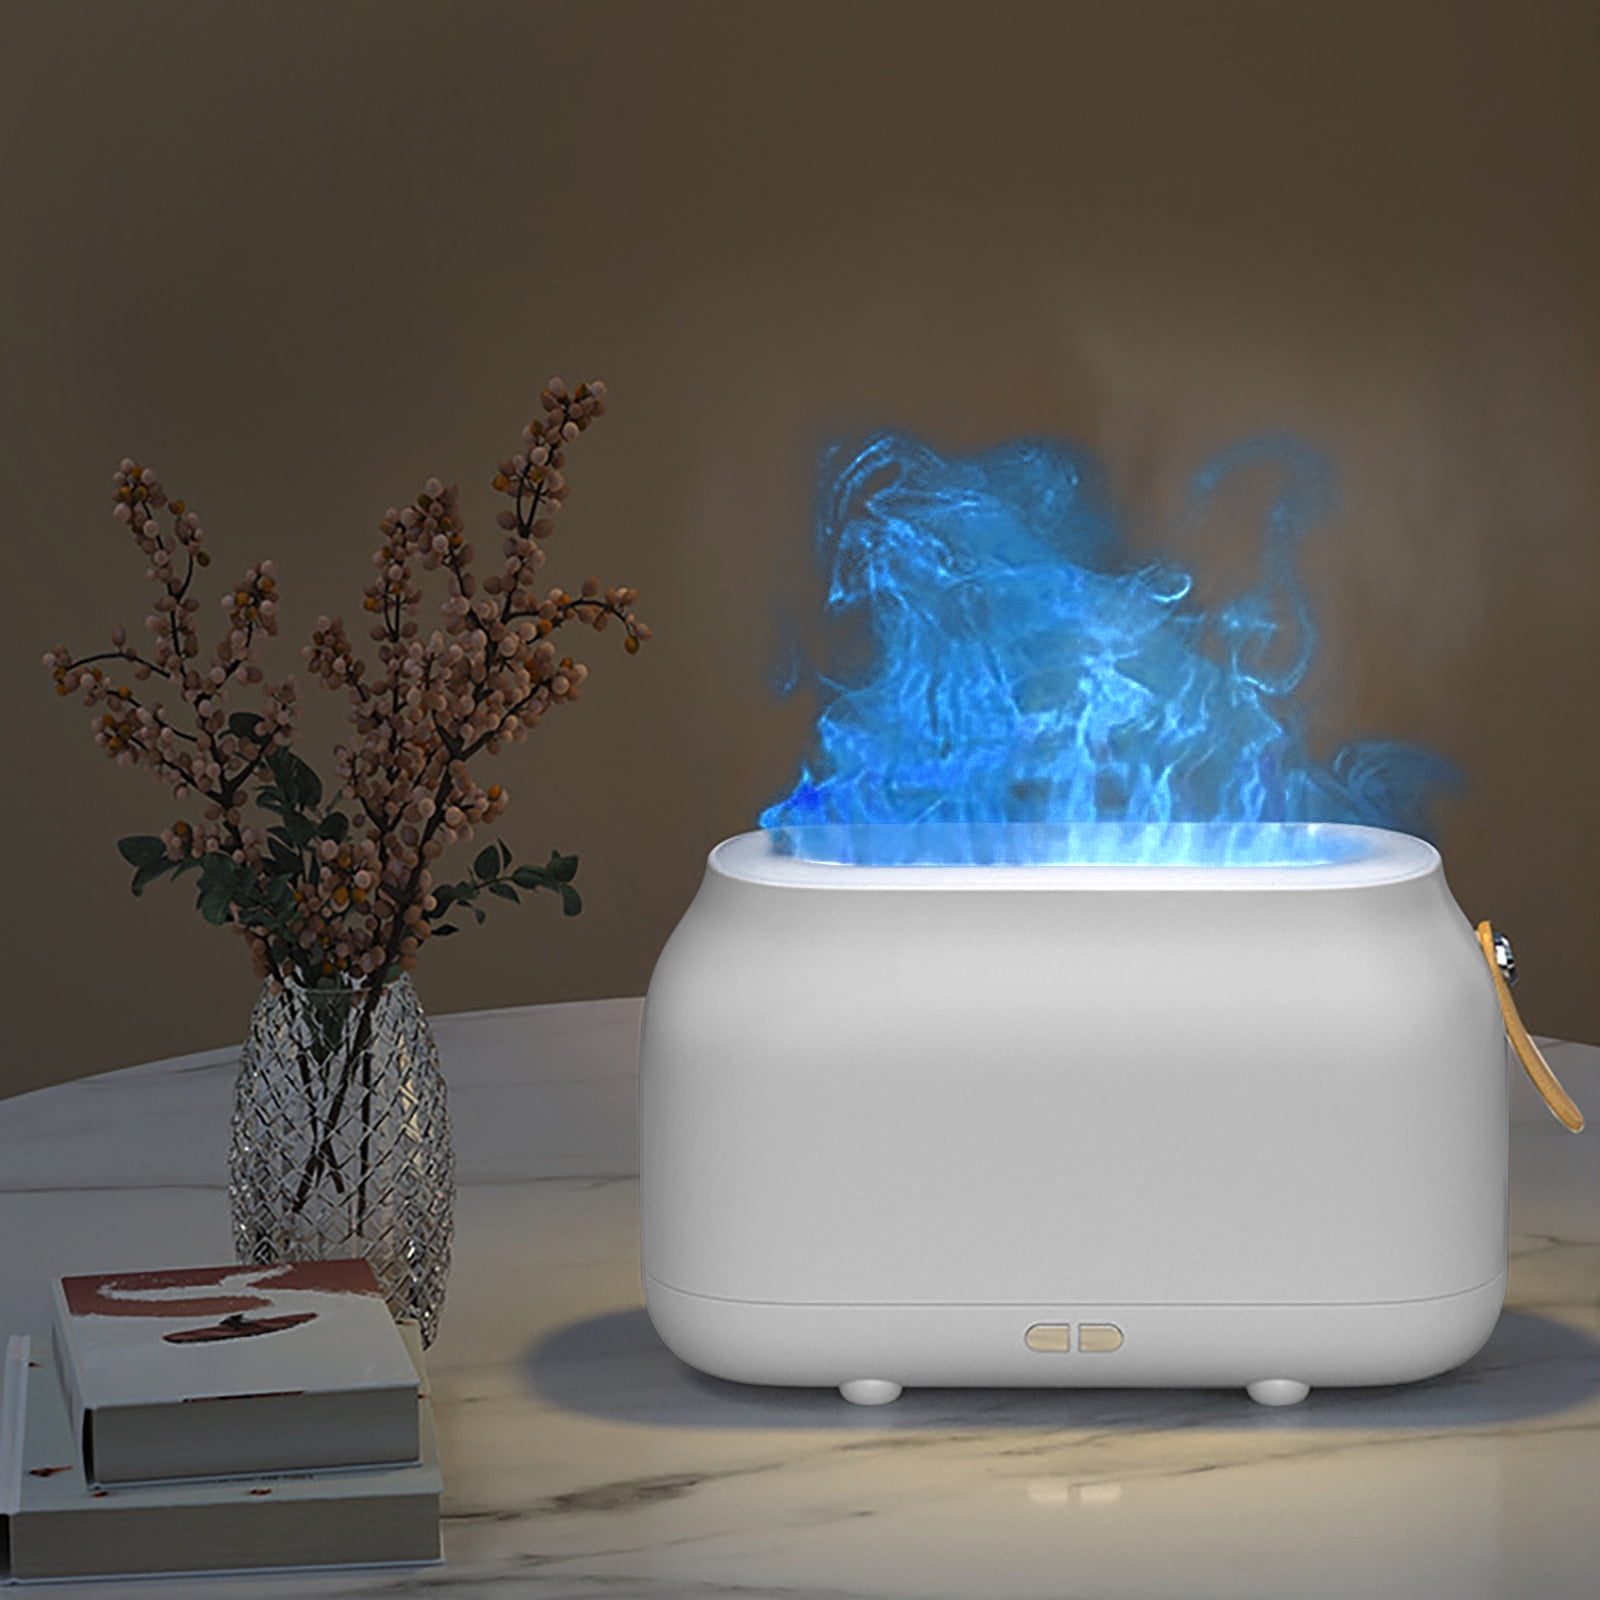 SDJMa Flame Air Aroma Diffuser Humidifier,Auto Off Essential Oil